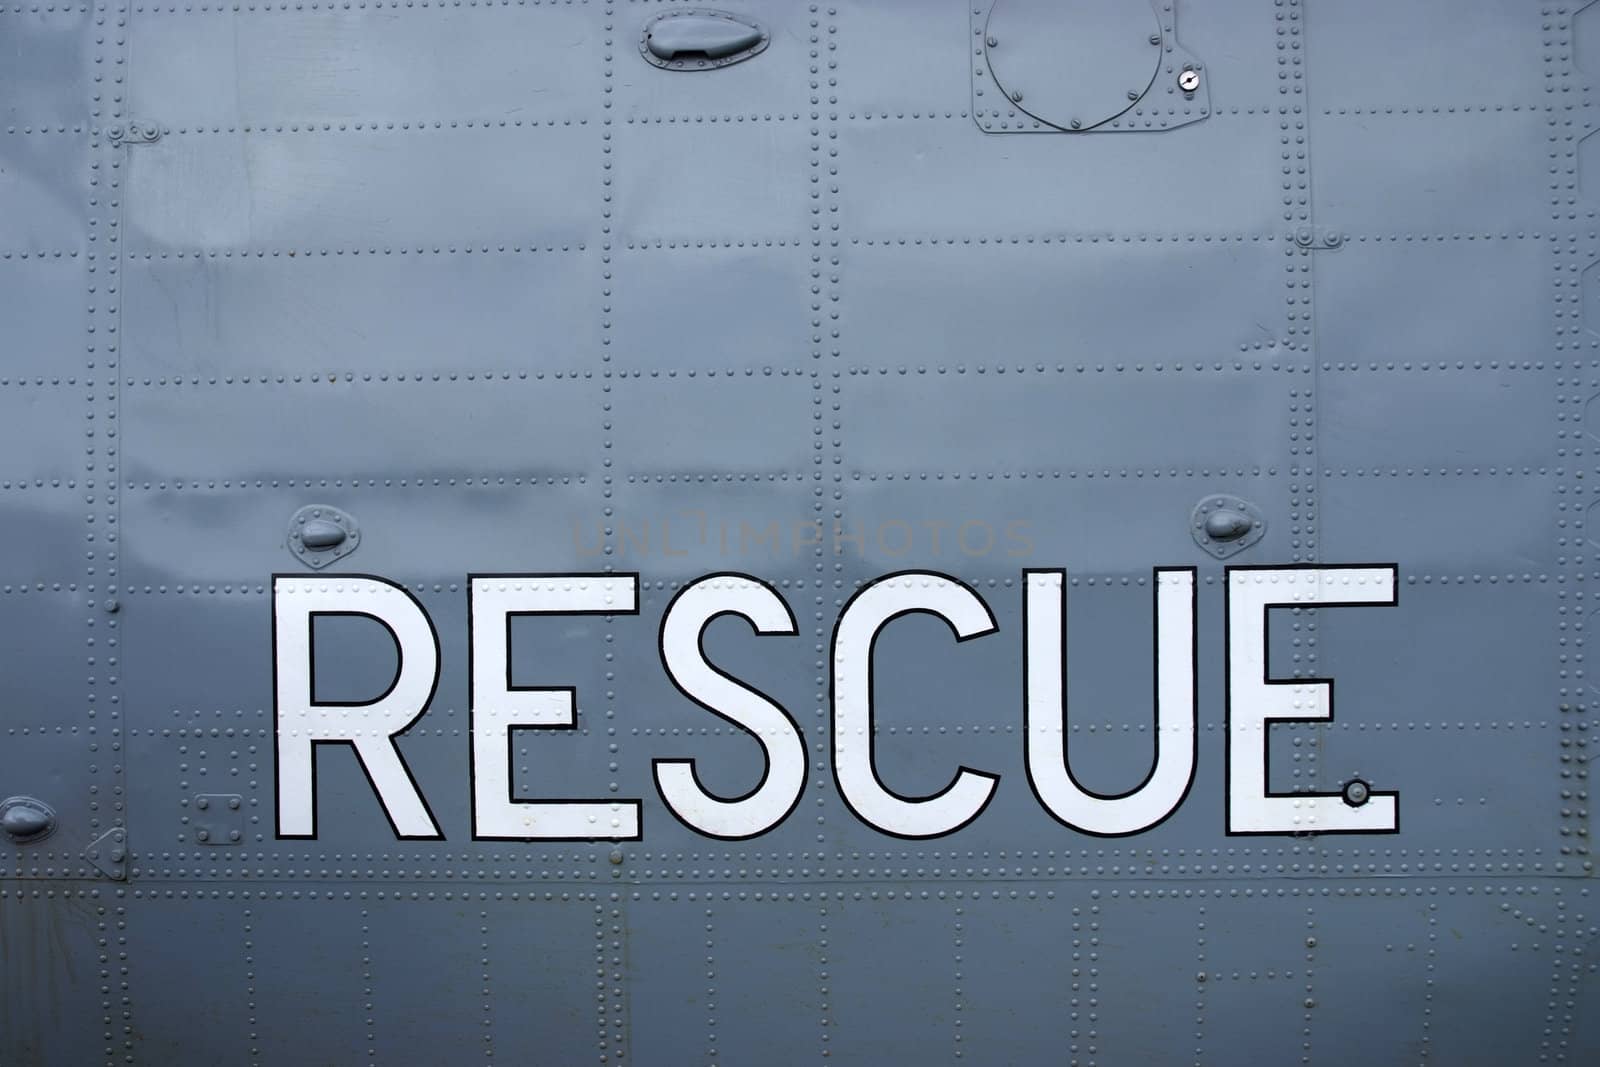 Rescue sign painted in white on a helicopter